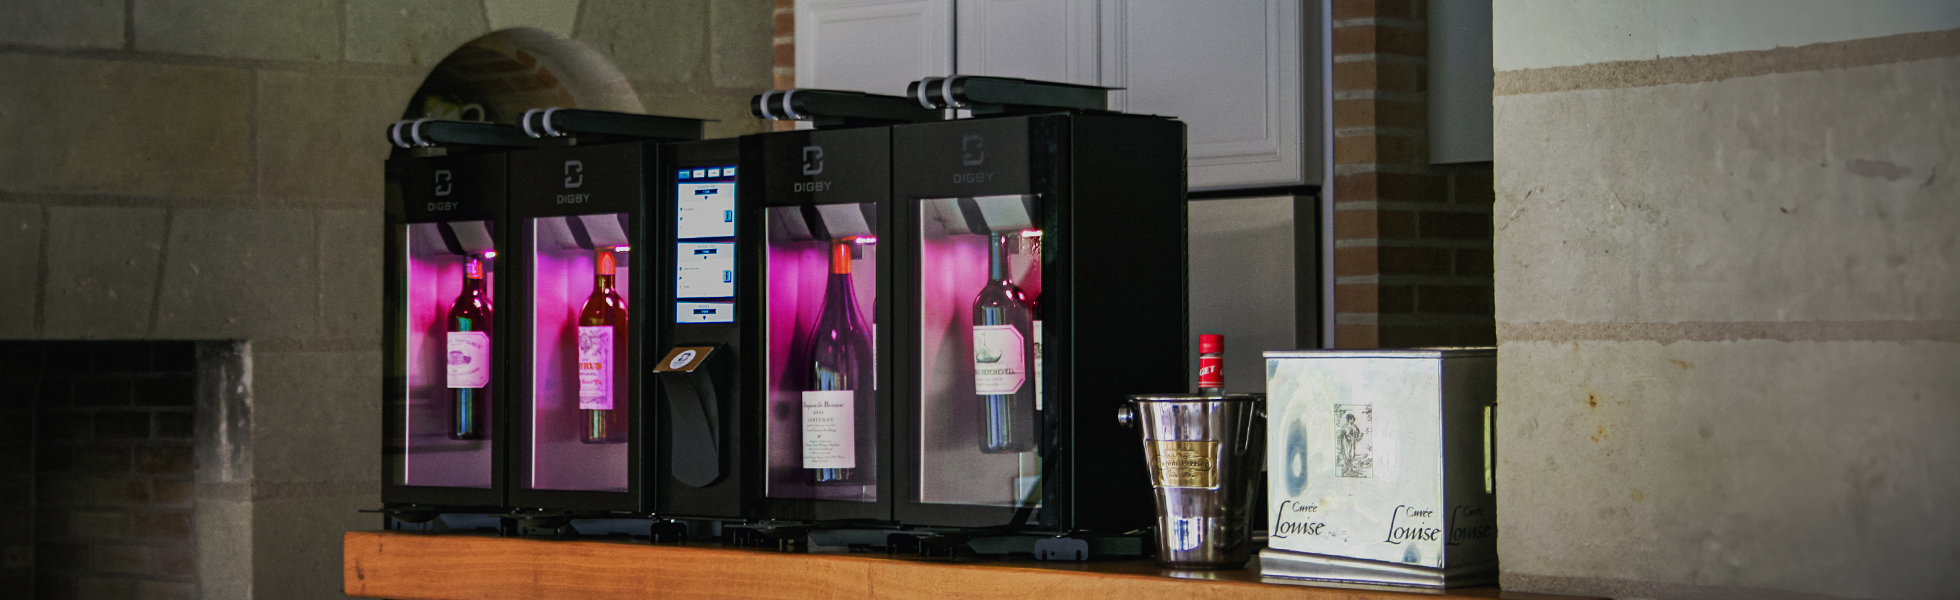 Digby 8-bottle Digital wine dispenser by the glass